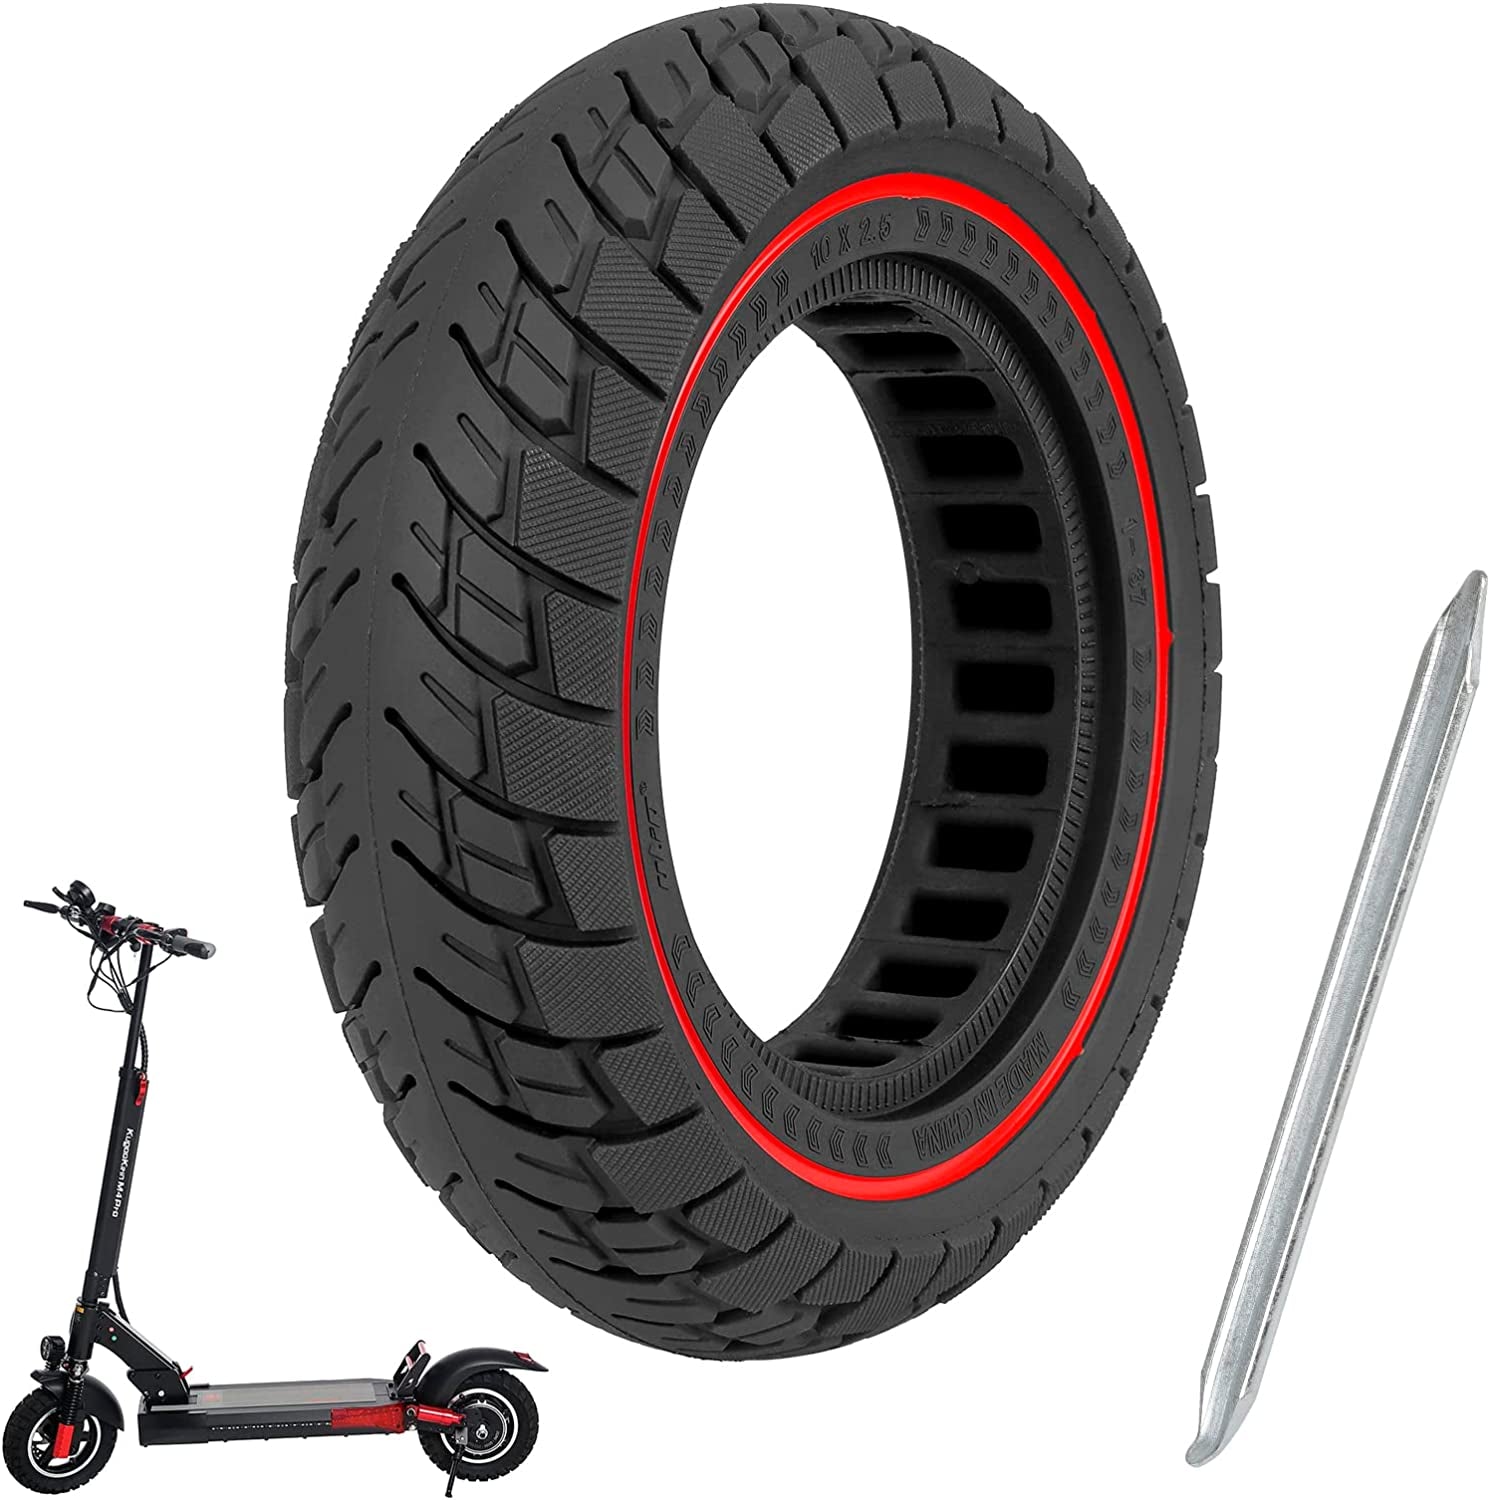 10 Inch Solid Tire, 10x2.50 Tire, Suitable For Electric Scooter, Balance  Drive, Bicycle Tire, High-quality 10x2.5 Solid Tire